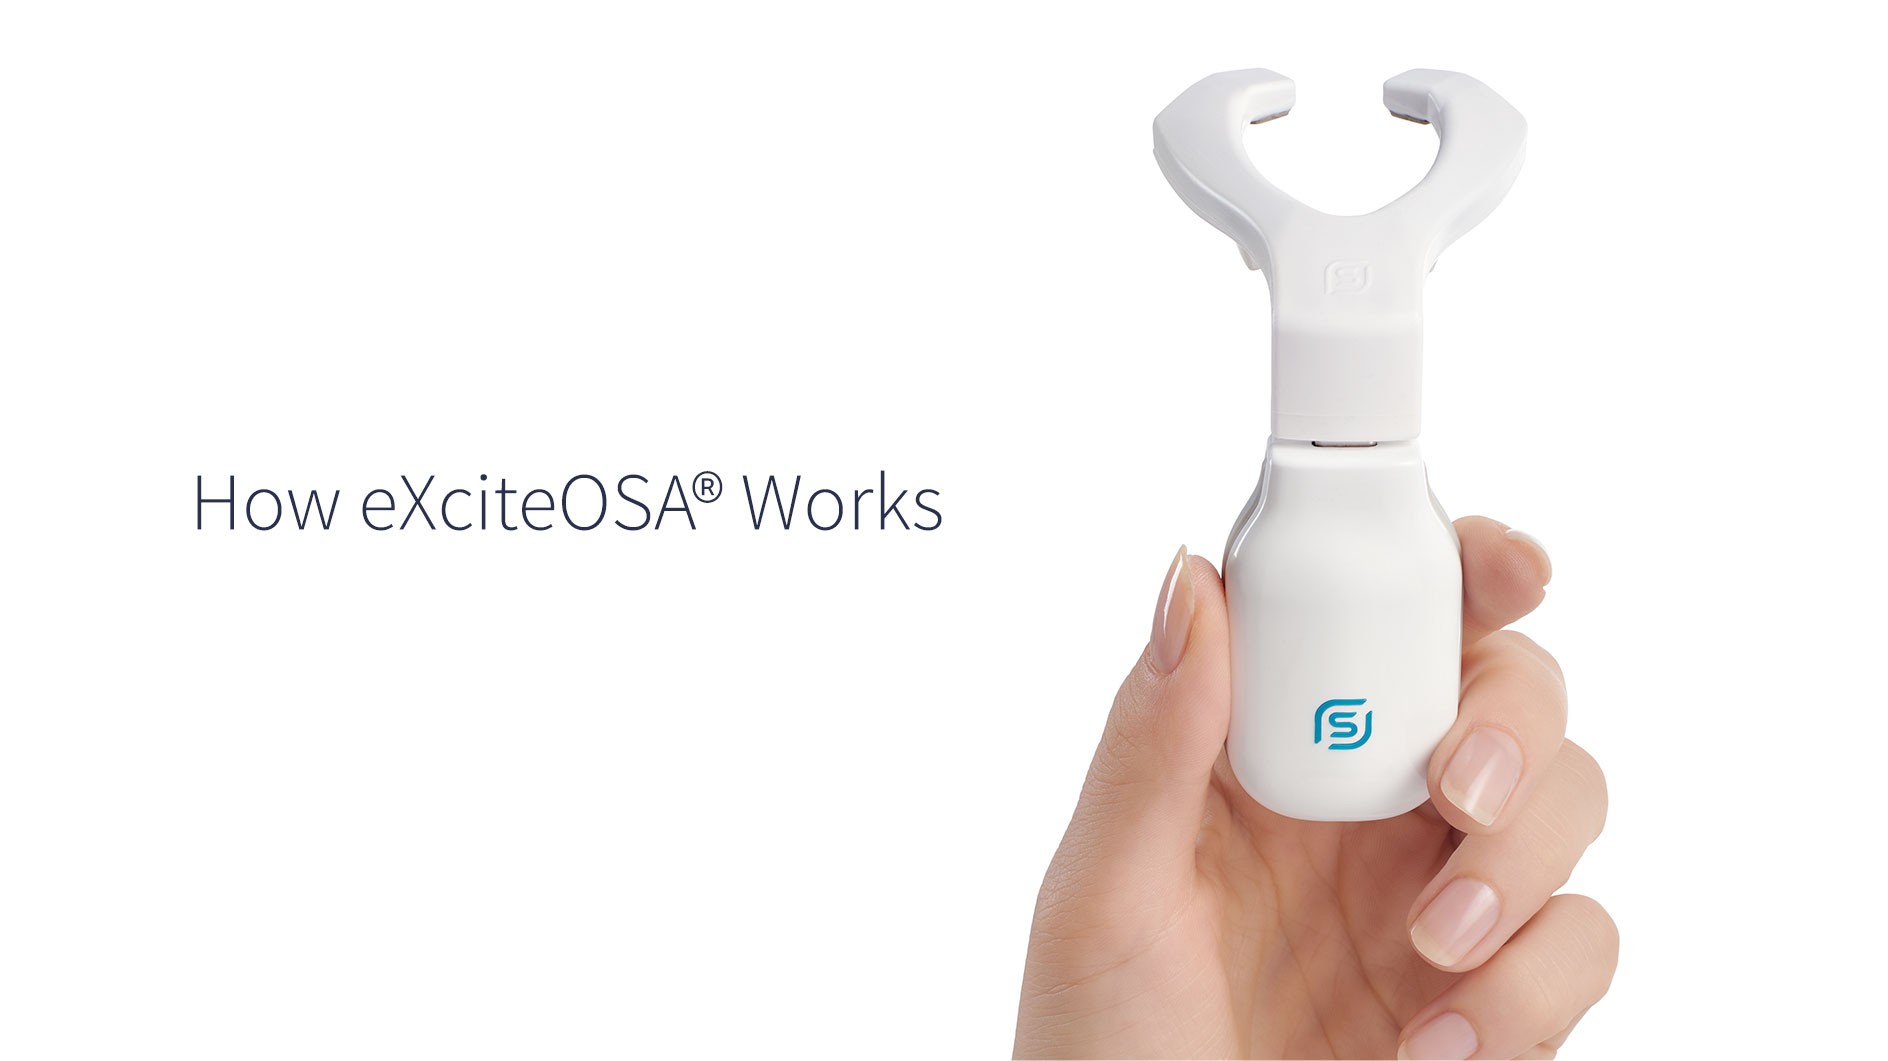 how eXciteOSA works - hand with device